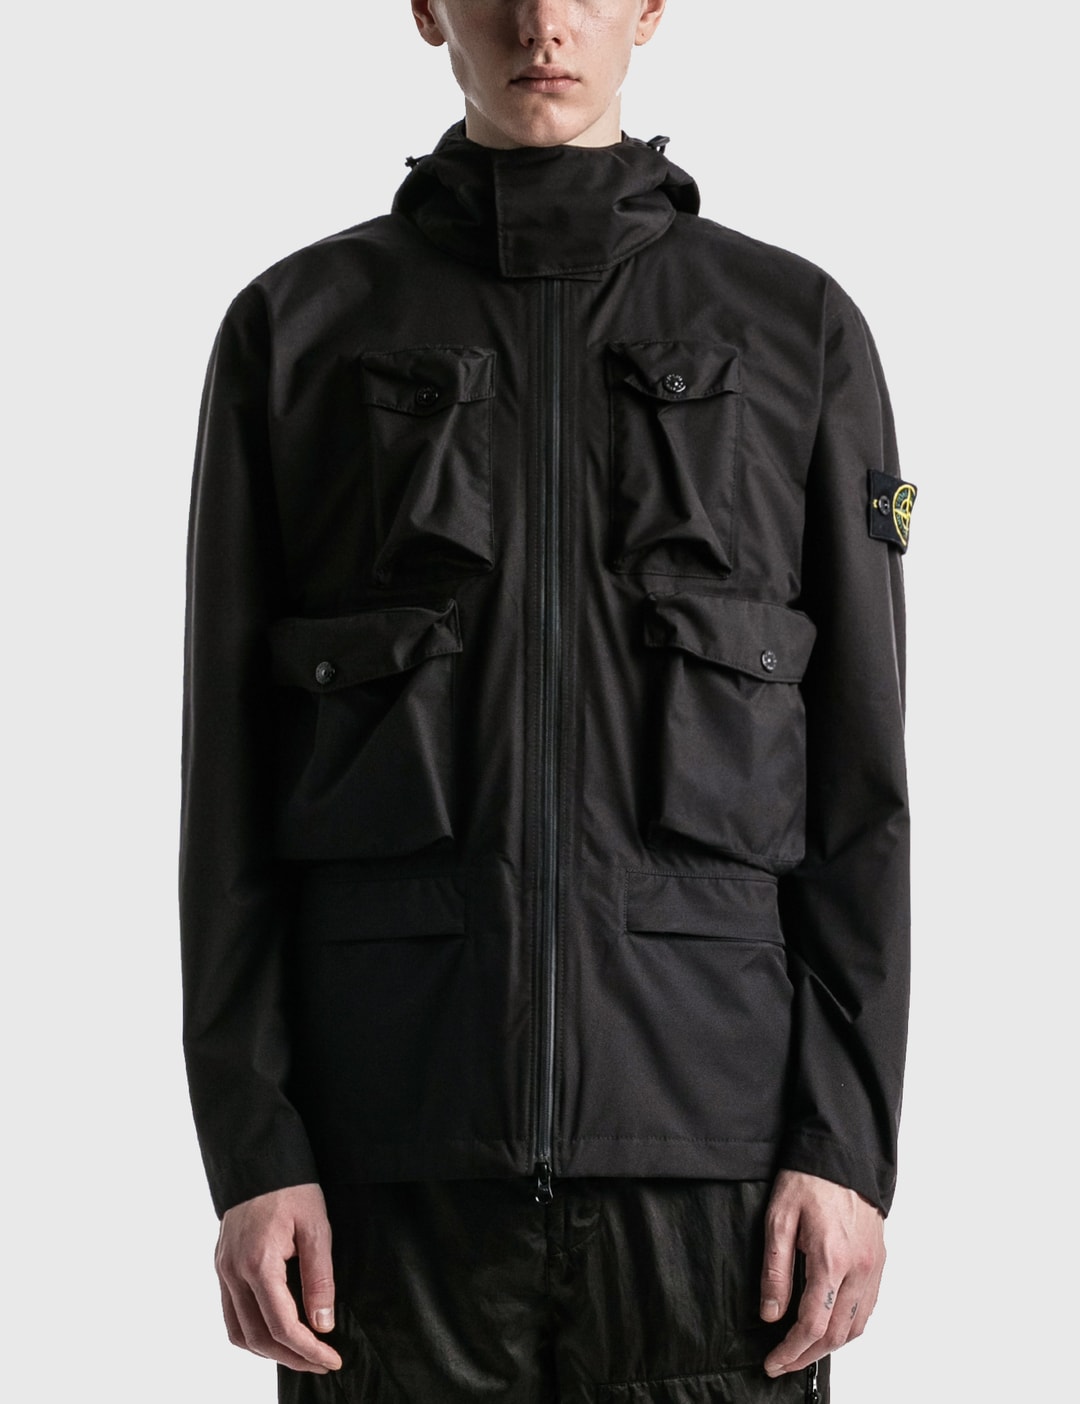 Stone Island - Gore-tex Packable Jacket | HBX - Globally Curated ...